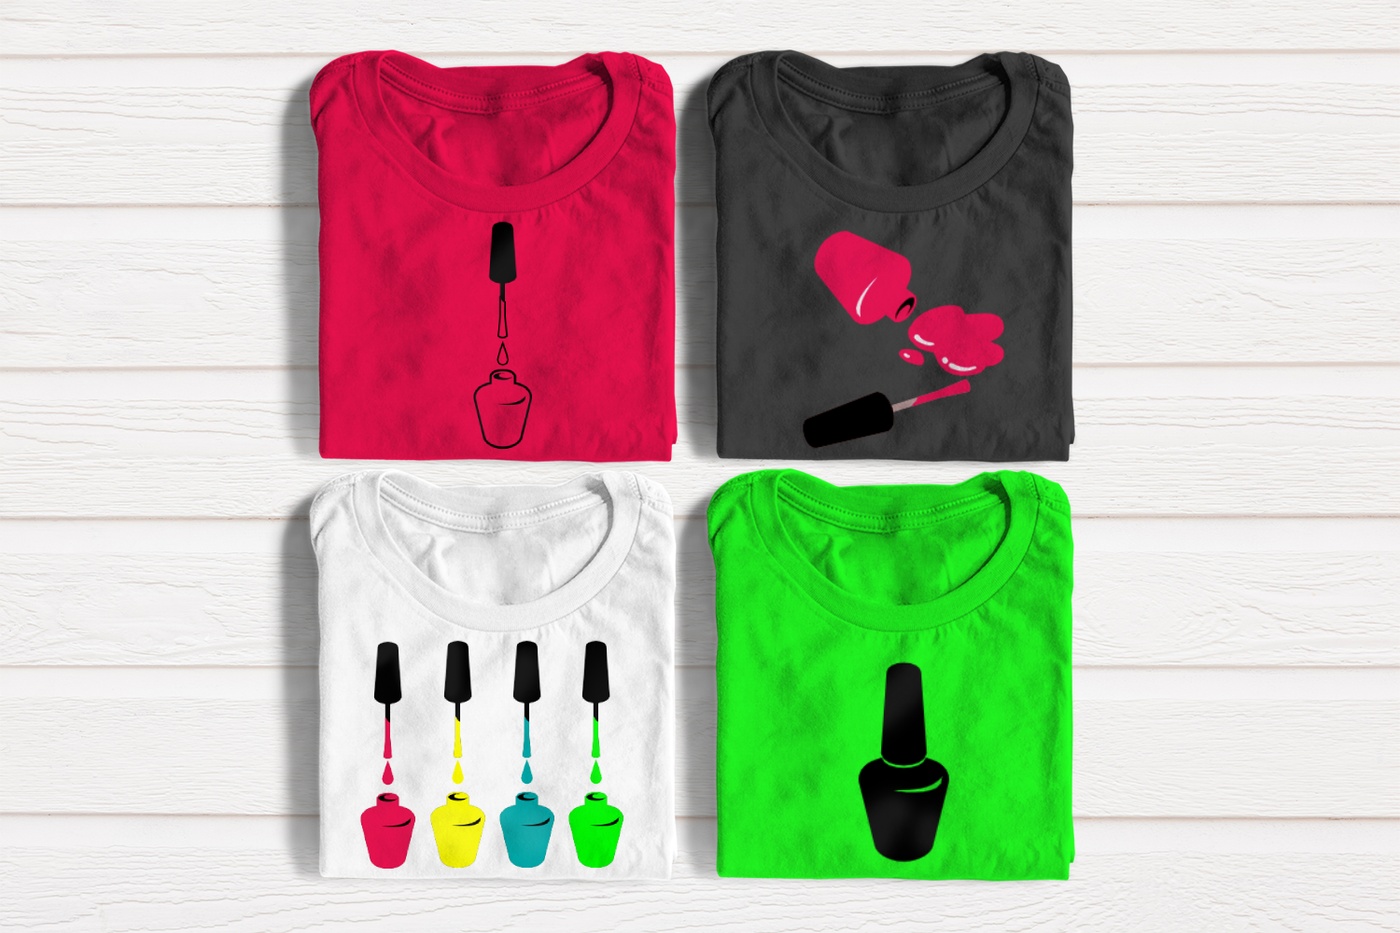 Four shirts with nail polish bottle designs.